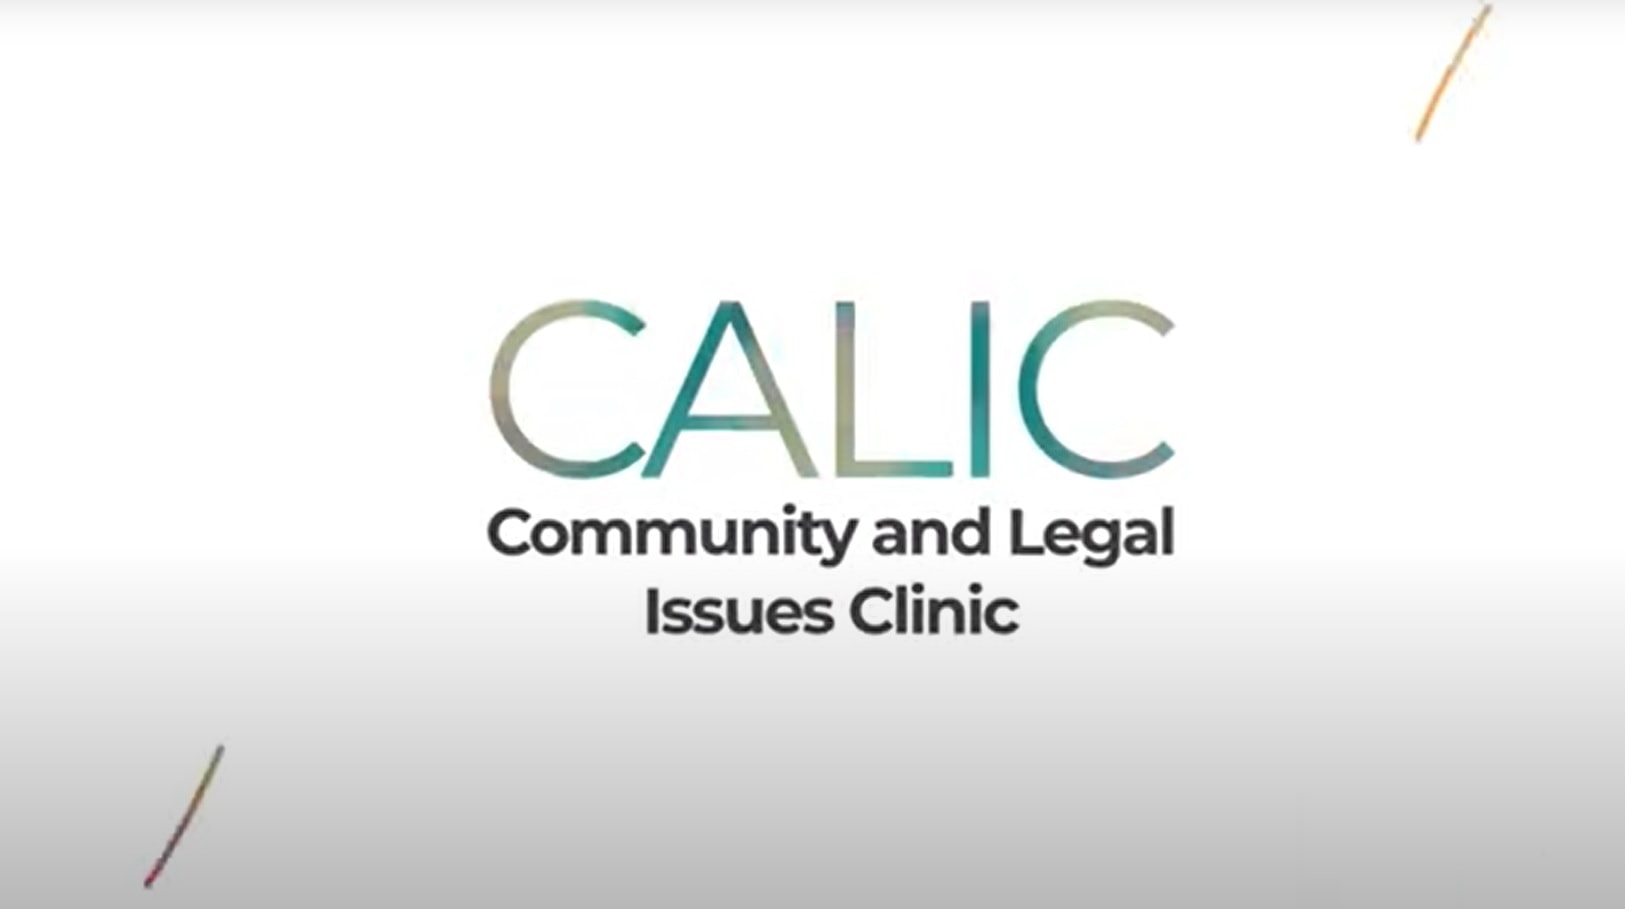 Virtual Community and Legal Justice Clinic will be Feb. 5